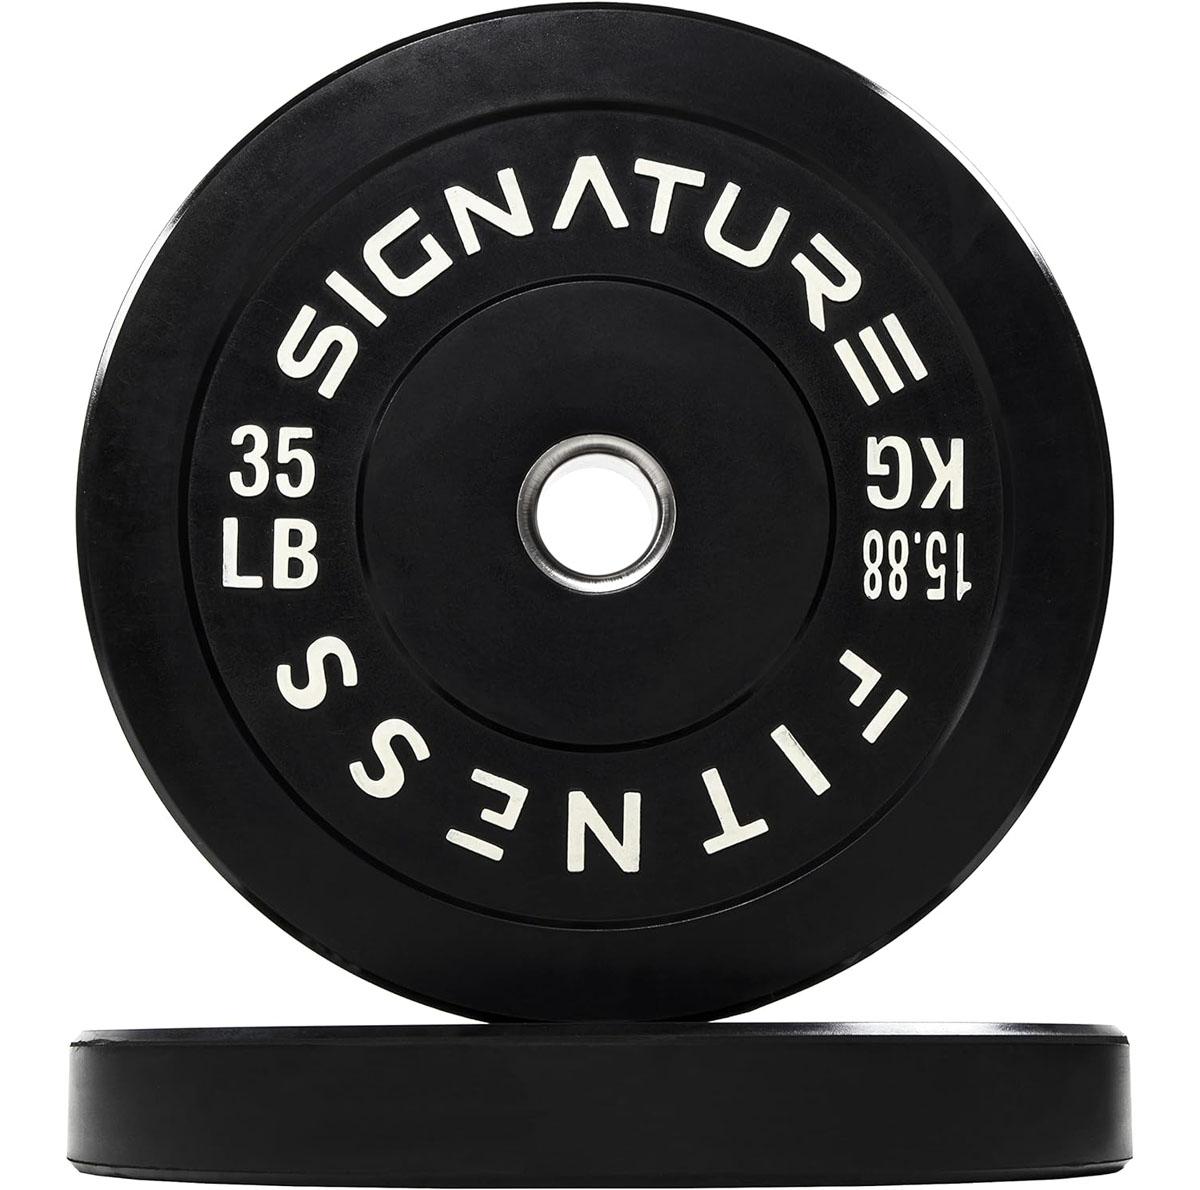 Signature Fitness 2in Olympic Bumper Plate Weight Plates 35lbs Pair $45.12 Shipped